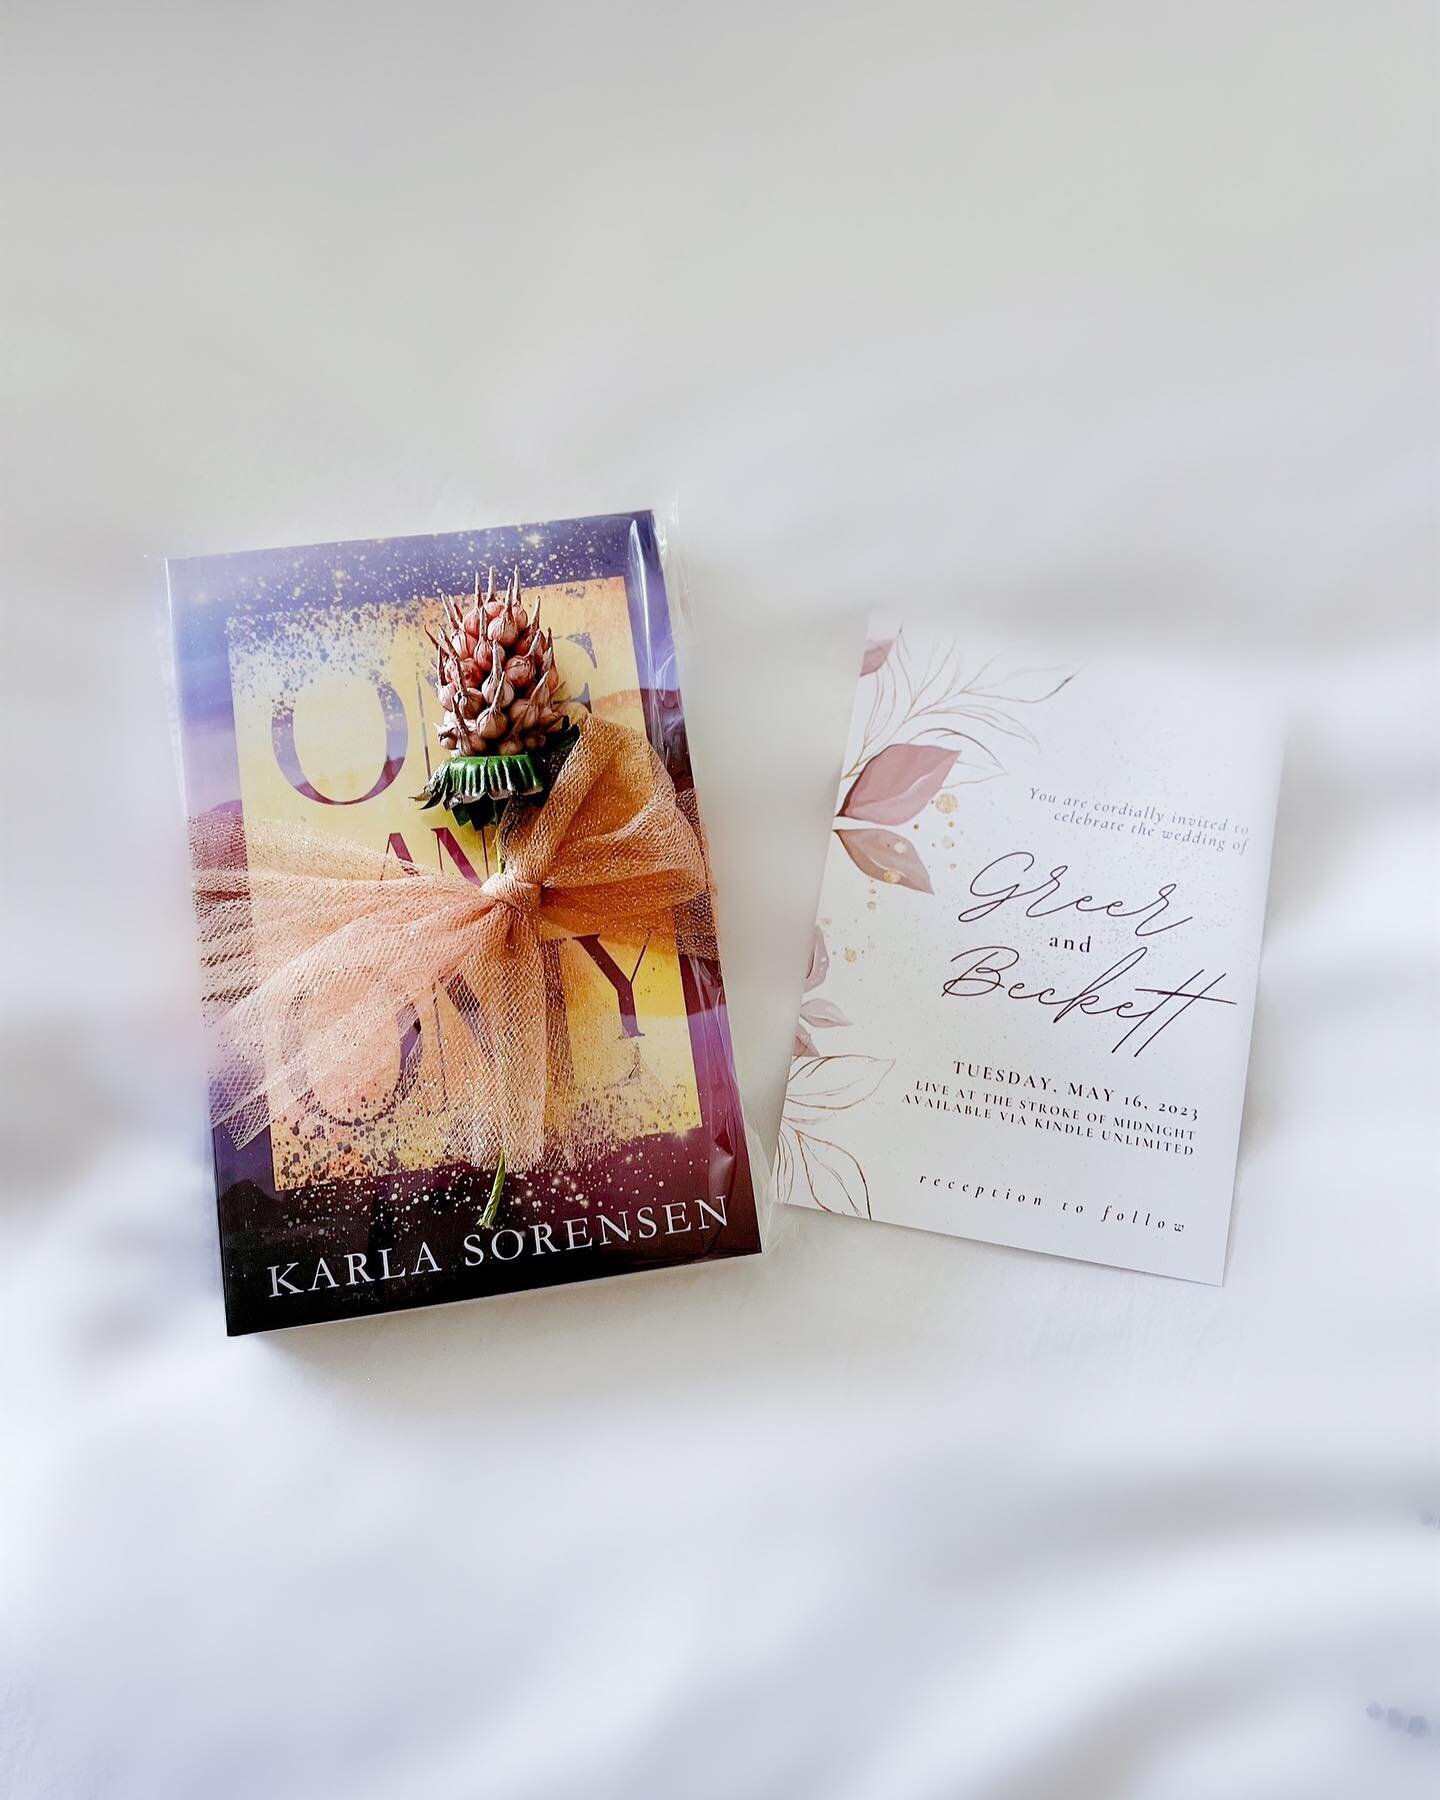 You are cordially invited to celebrate the wedding of Greer and Beckett. 🤍✨💐

One and Only by @karla_sorensen is out now on Kindle Unlimited and paperback! 

My rating: 5/5 ⭐️

⁣
.⁣
.⁣
.⁣
.⁣
.⁣
#wilderfamily #marriageofconvenienceromance #newreleas